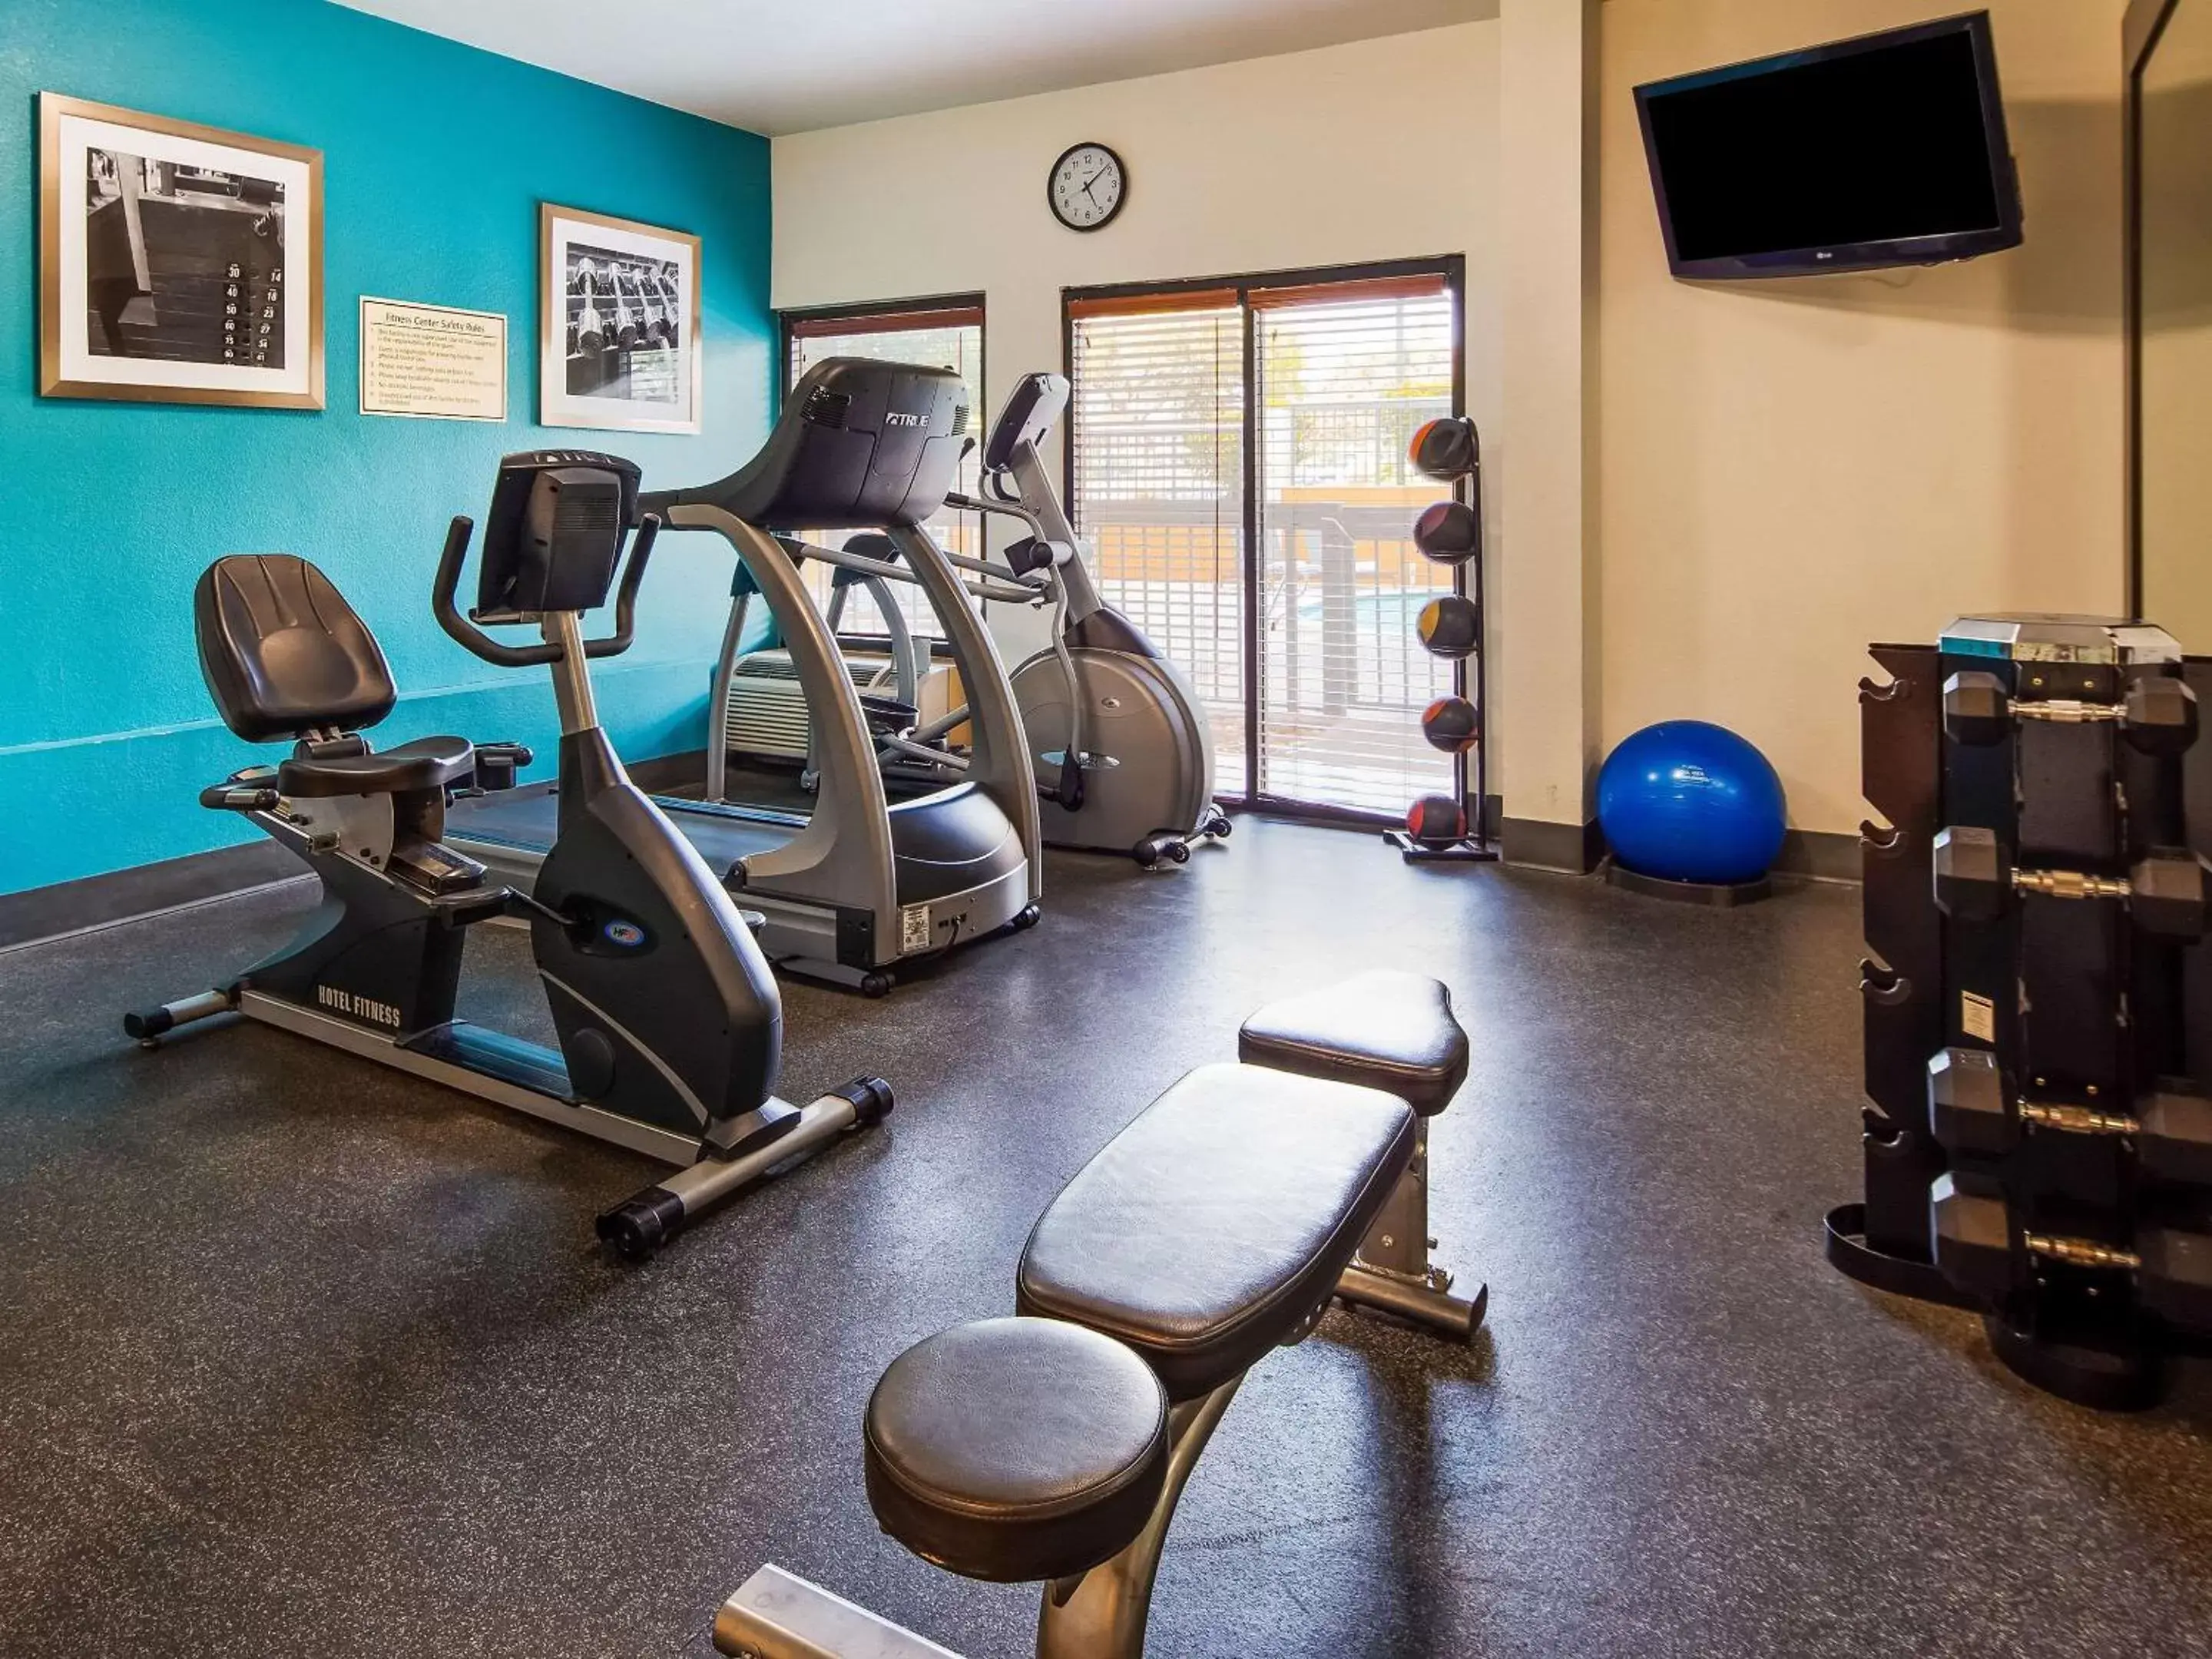 Activities, Fitness Center/Facilities in Clarion Pointe near Medical Center